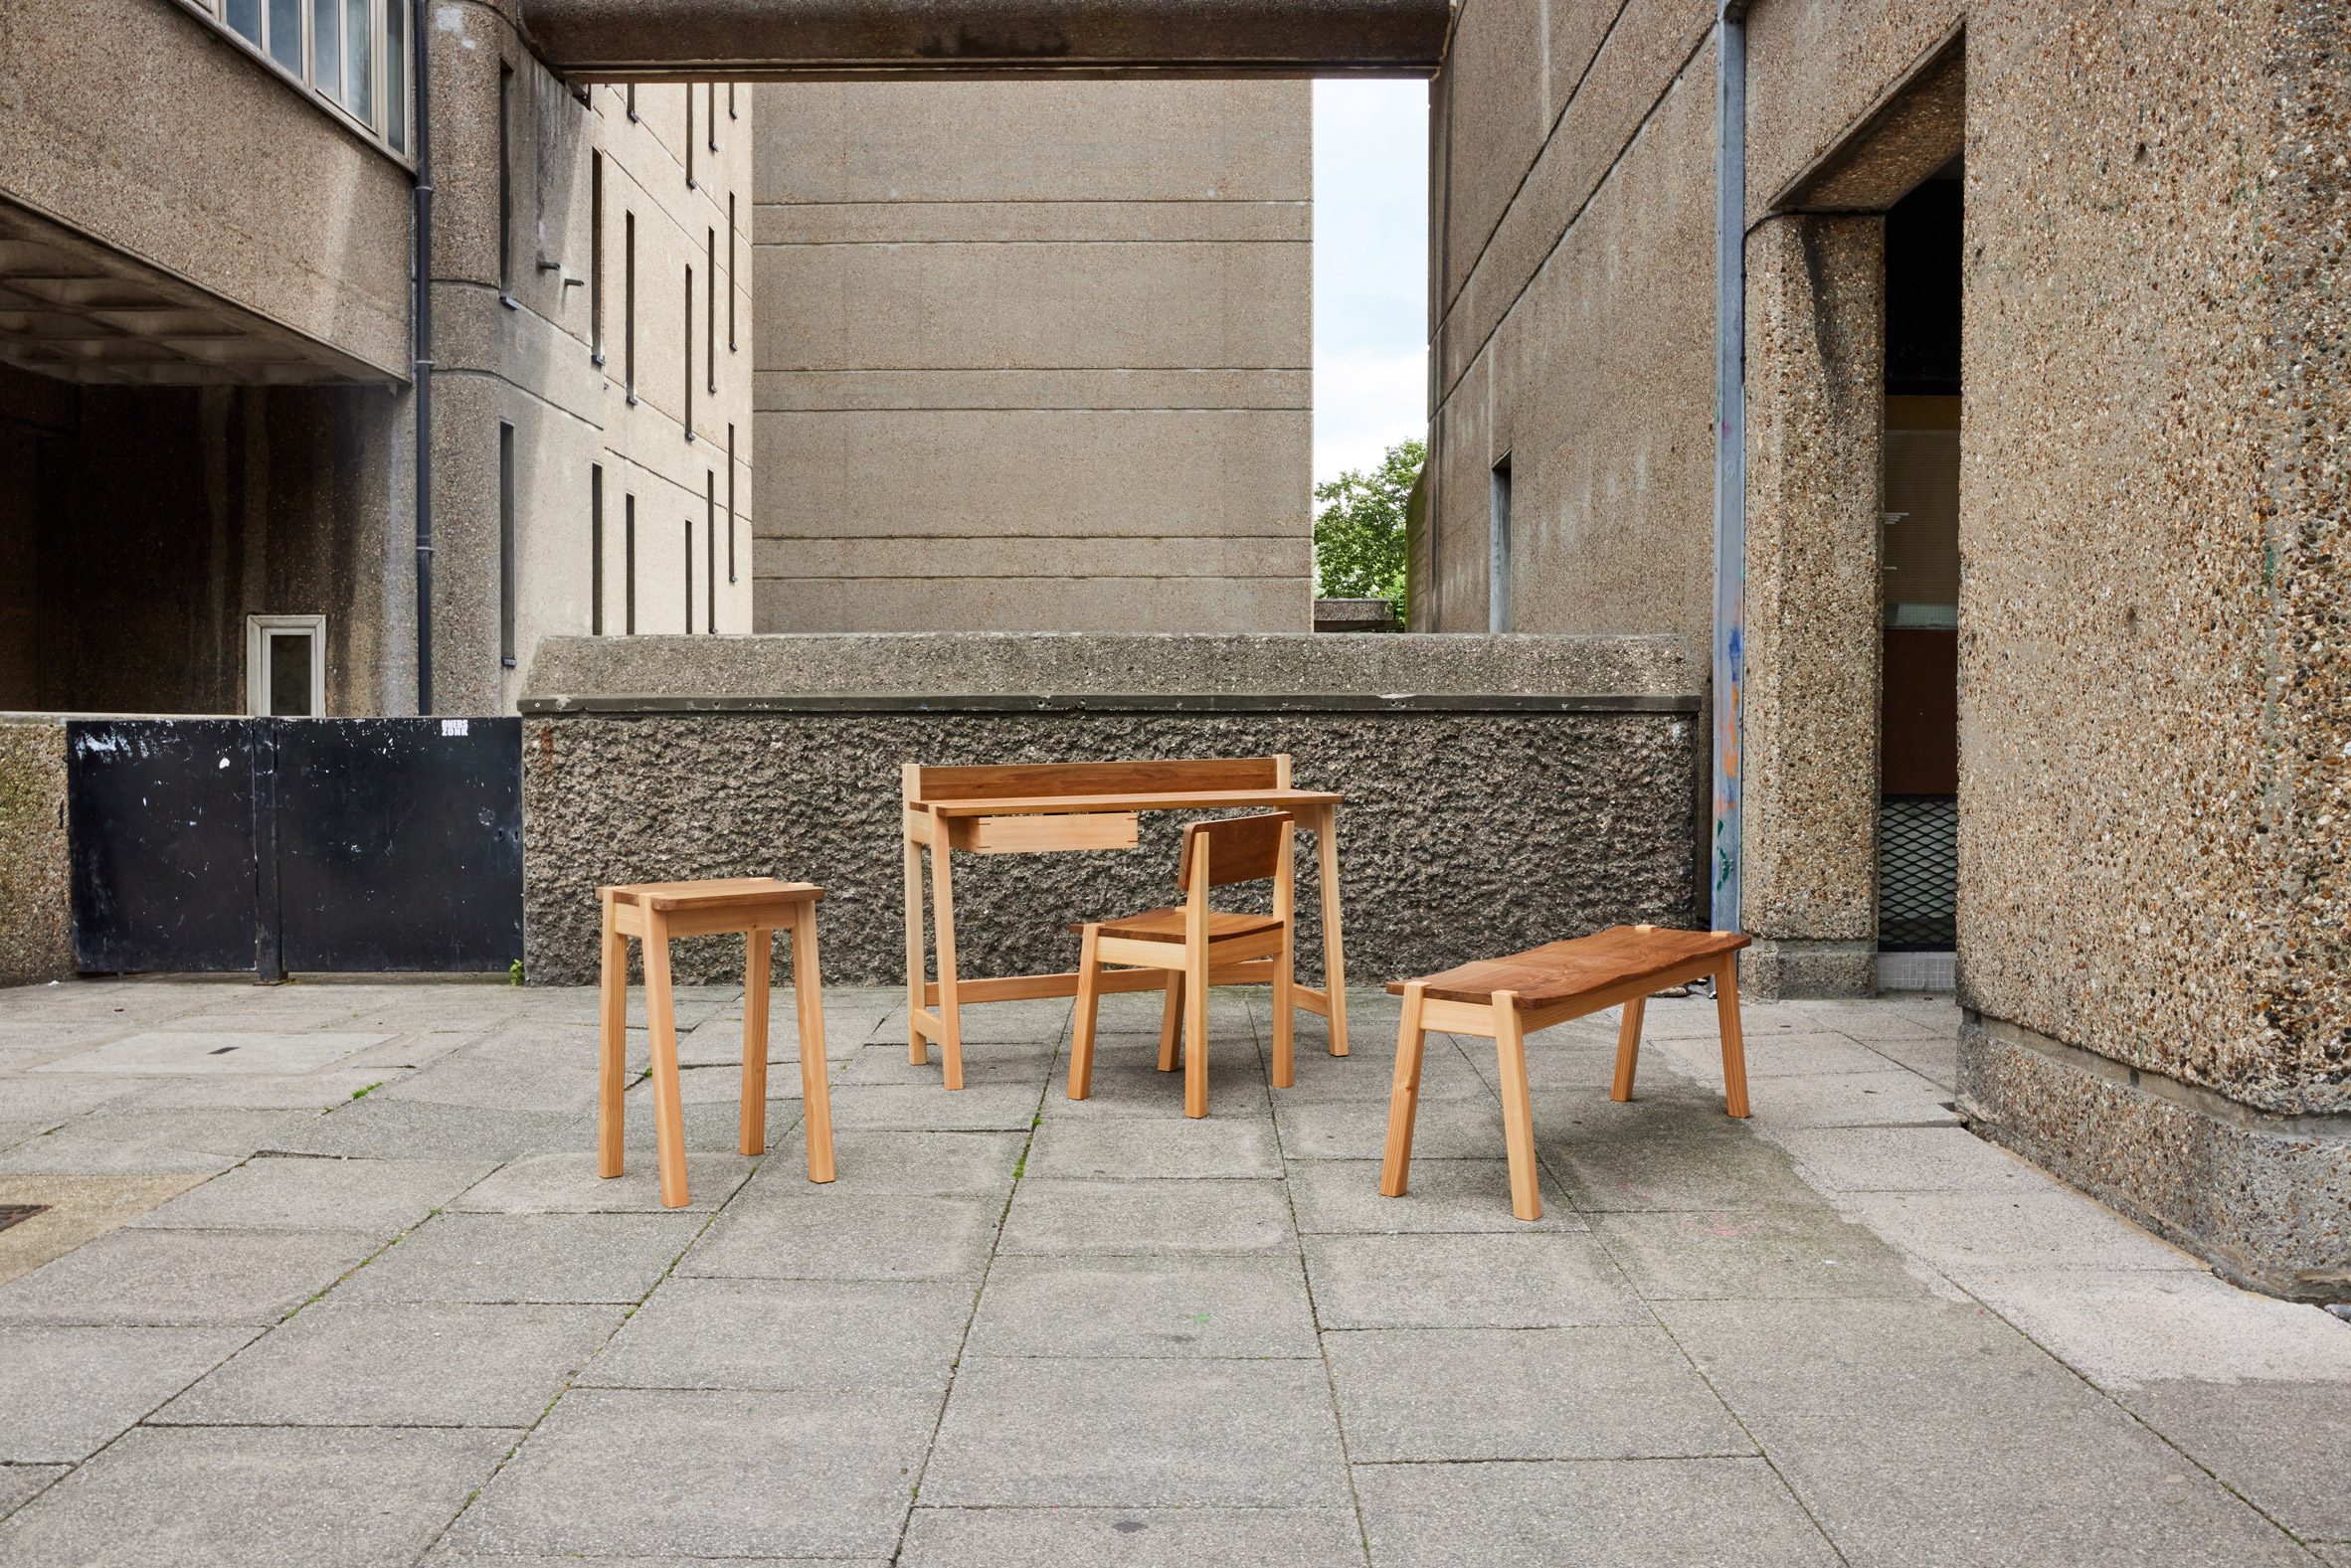 Ayrton Collection by Goldfinger photographed at Trellick Tower